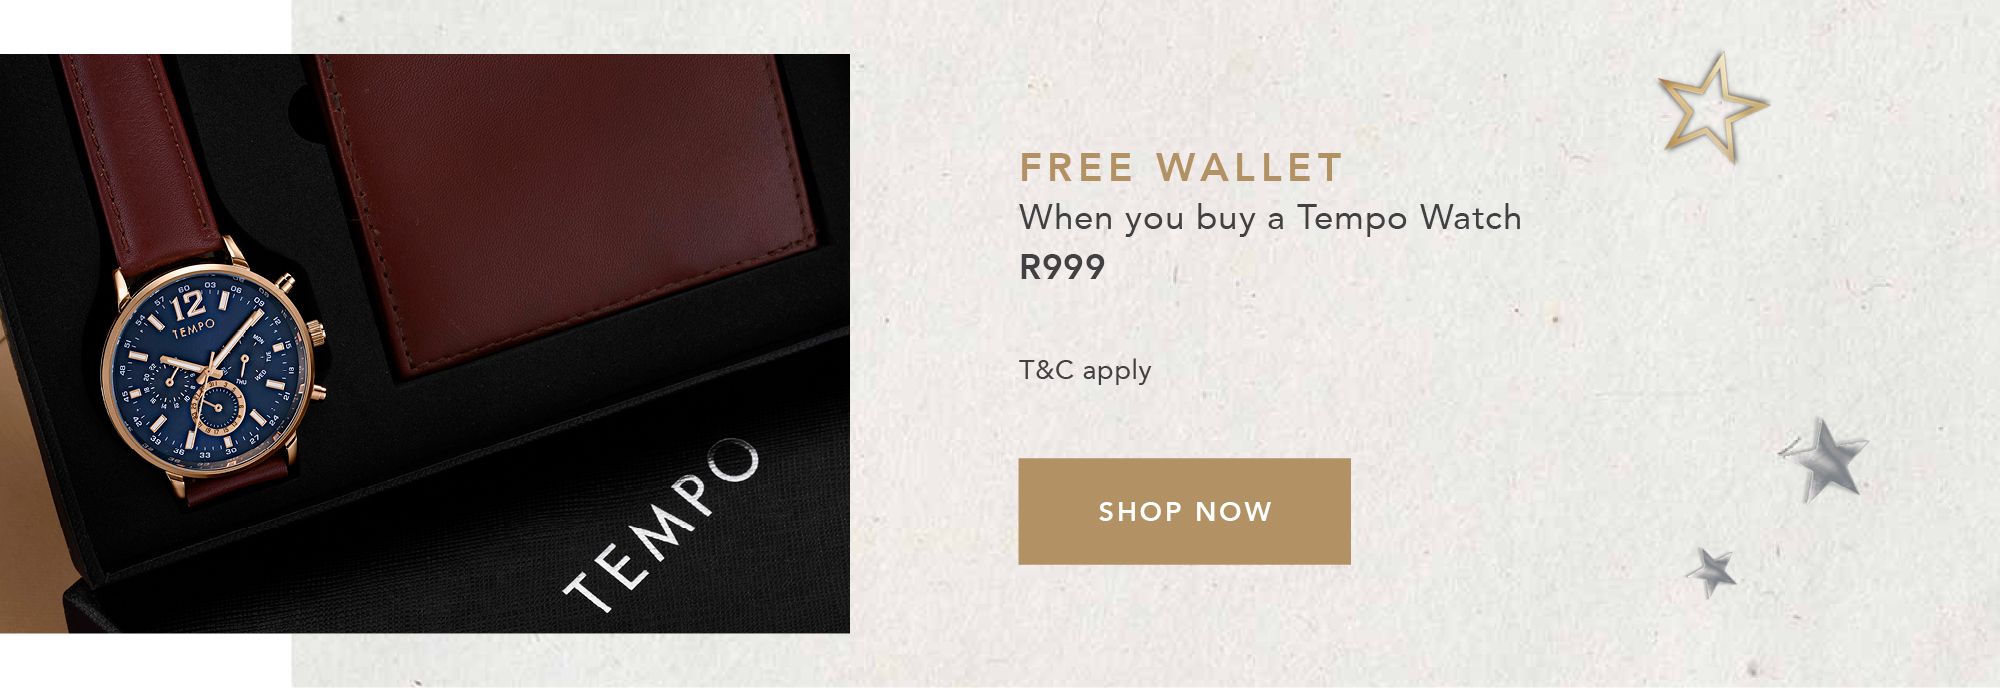 FREE WALLET When you buy a Tempo Watch